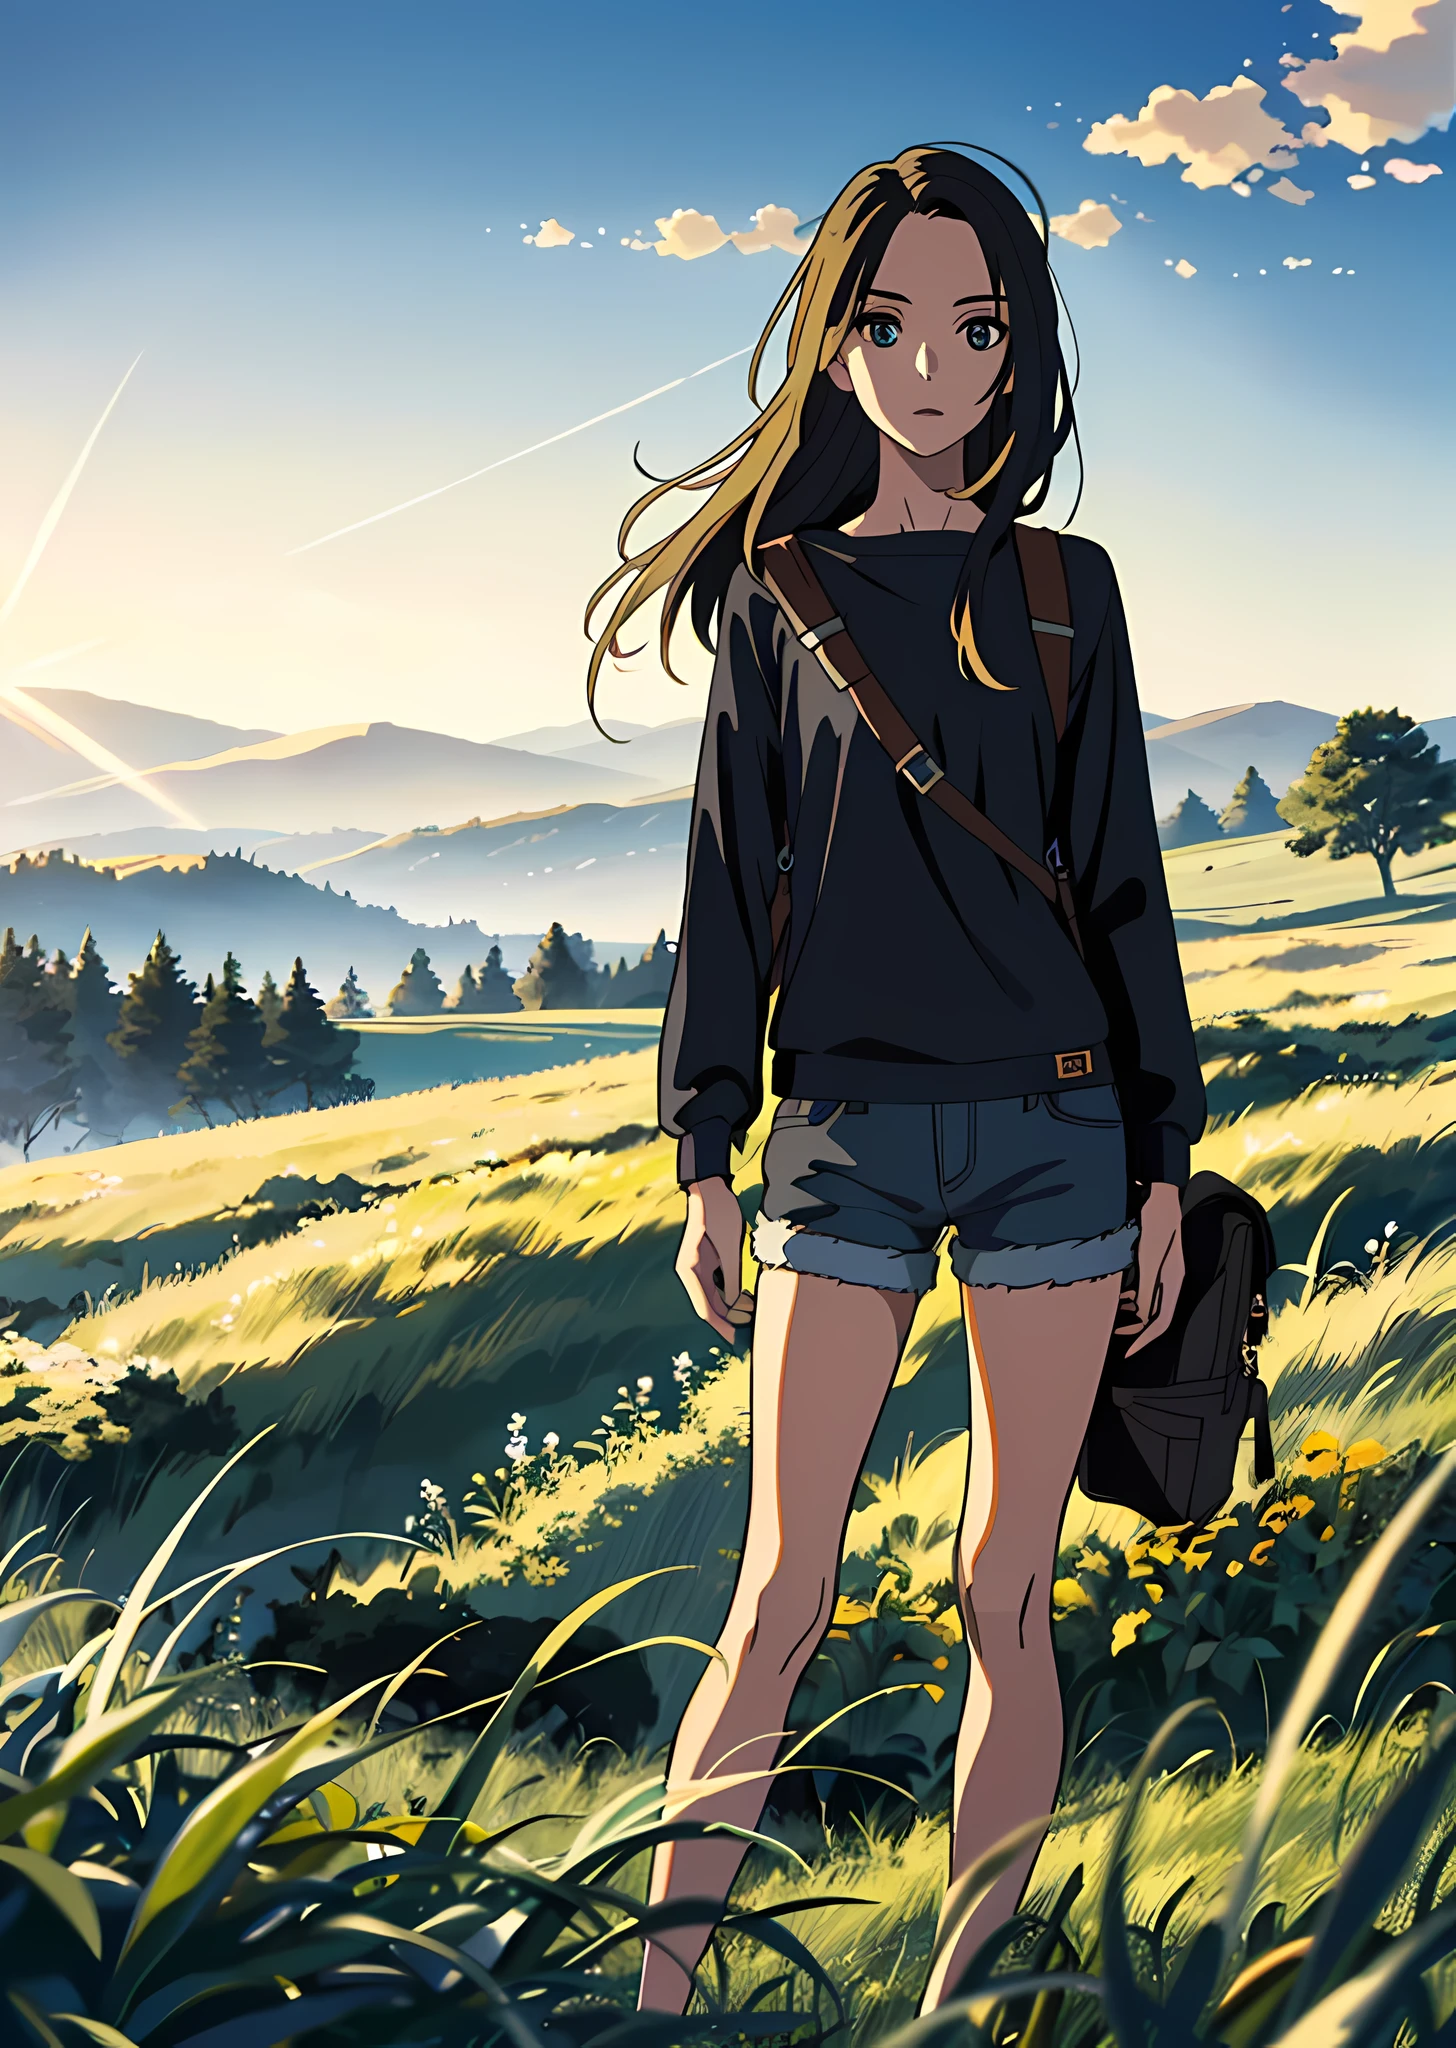 (Vast sky, beautiful skyline, large grassland: 1.2+ intense and dramatic graphics, moving visuals: 1.3+ hanging North Star, colorful natural light: 1.3), (long-sleeved top, (1girl), denim shorts, backpack: 0.8), (back, dynamic), (detailed character modeling: 1.2, natural skin tone, delicate texture), (beautiful girl, dynamic posture, confident posture: 0.2+ long hair flowing (black hair: 0.9+ blonde hair: 1.2), with femininity and temperament: 1.3+ beautiful face, witty and cute expressions and eyes), (large grassland in the background) + (rendering of natural light, light and shadow: 1.3), (shooting angle, long lens, light illumination